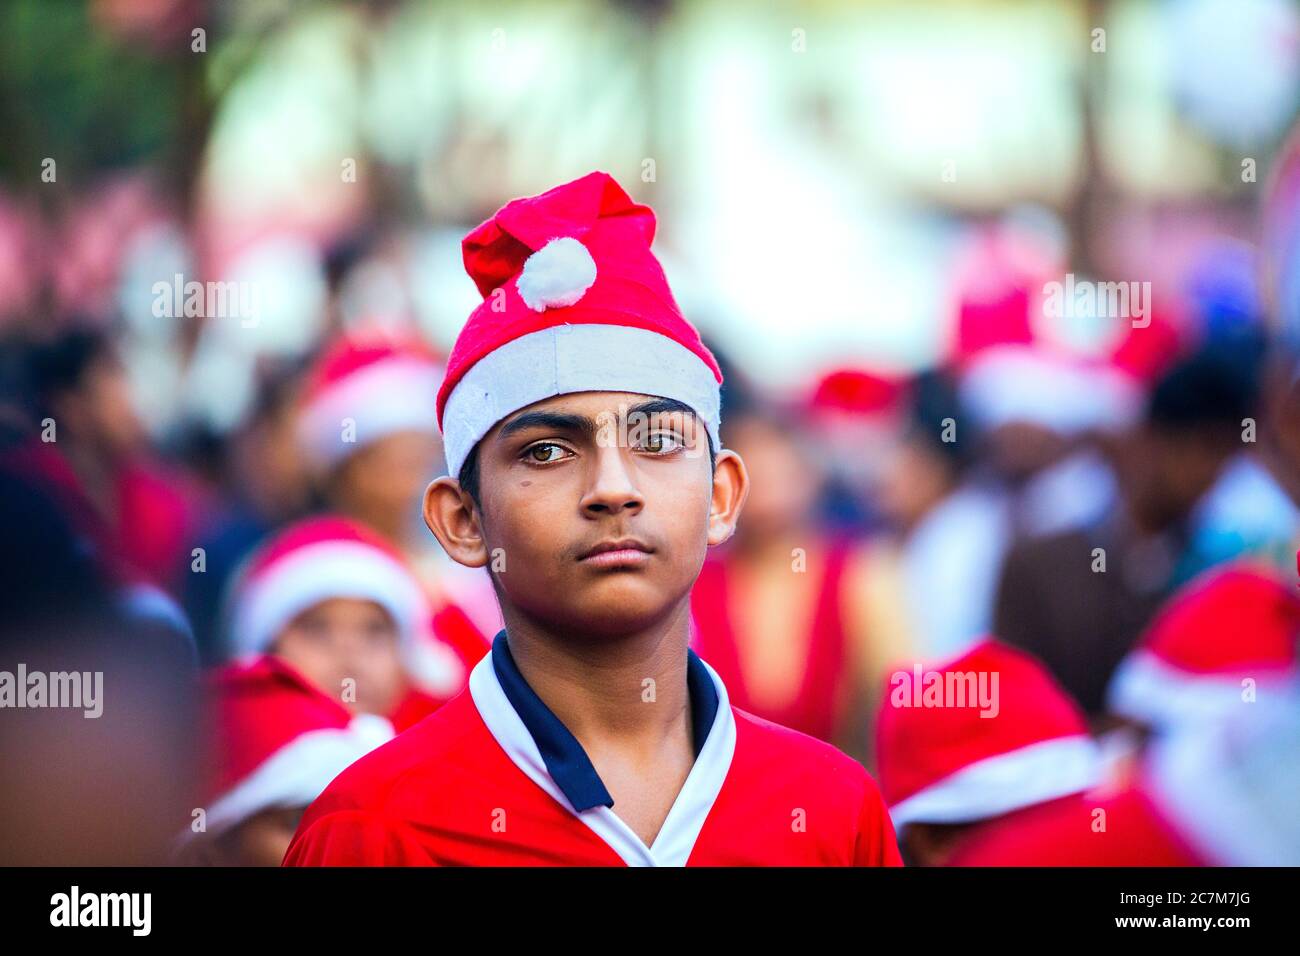 Buon Natale Thrissur 2020.Thrissur Buon Natale High Resolution Stock Photography And Images Alamy